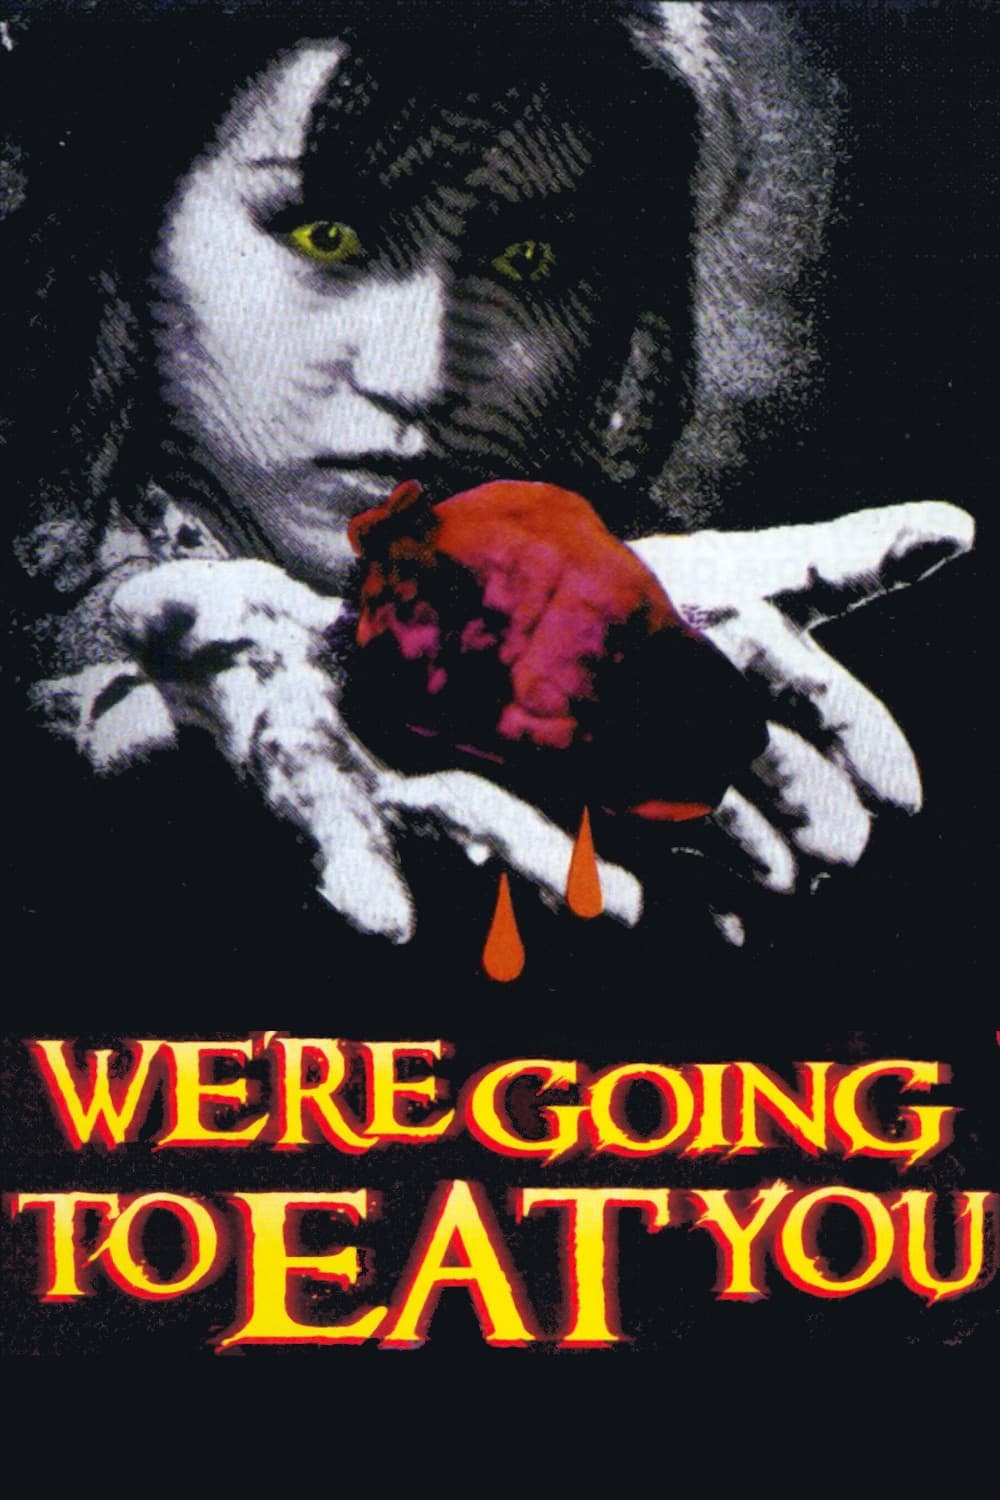 We're Going to Eat You (1980)